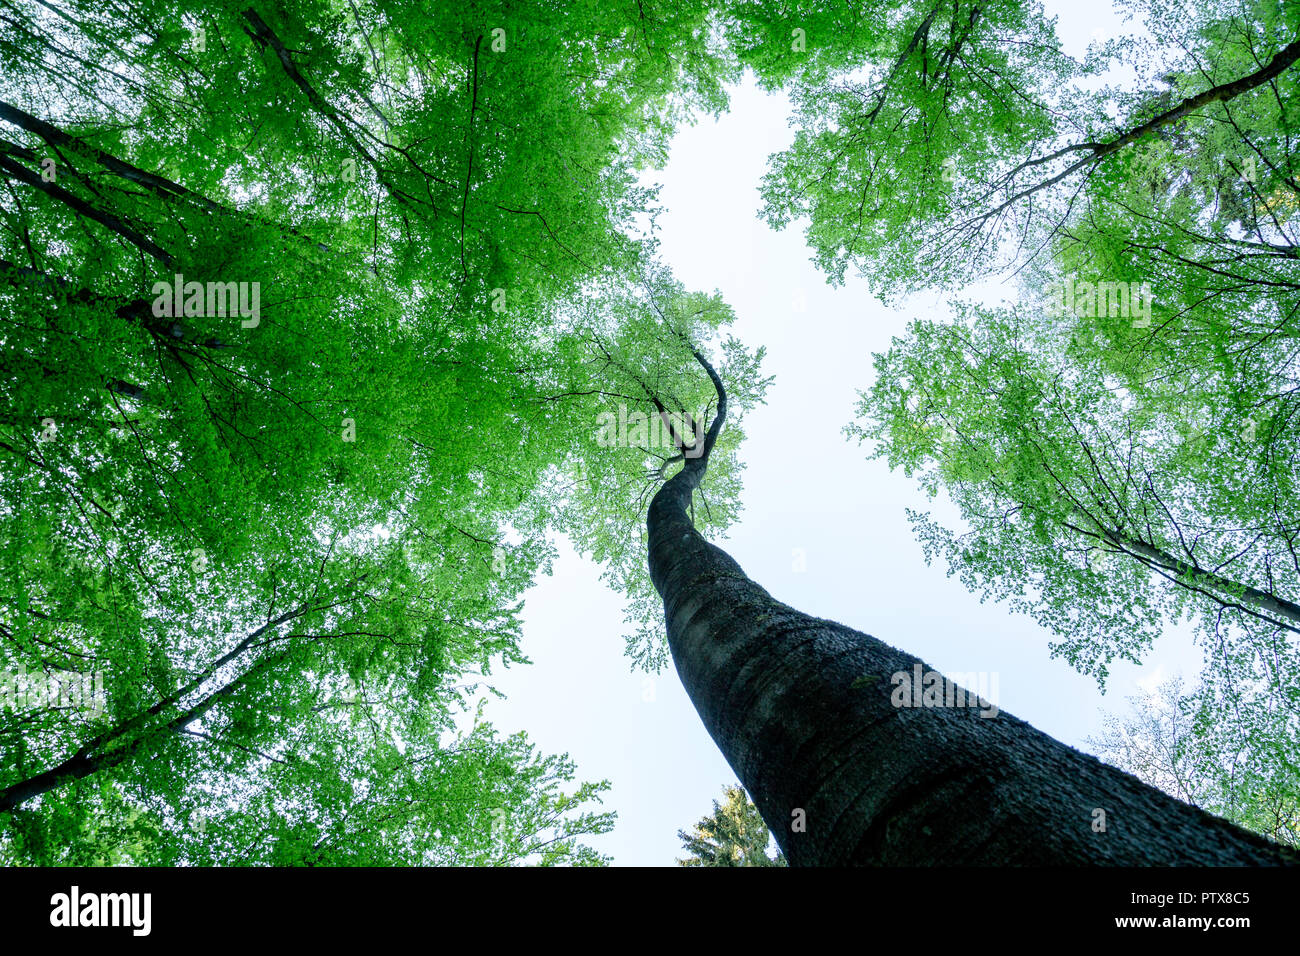 Big tree snakes in the air to the green treetops Stock Photo